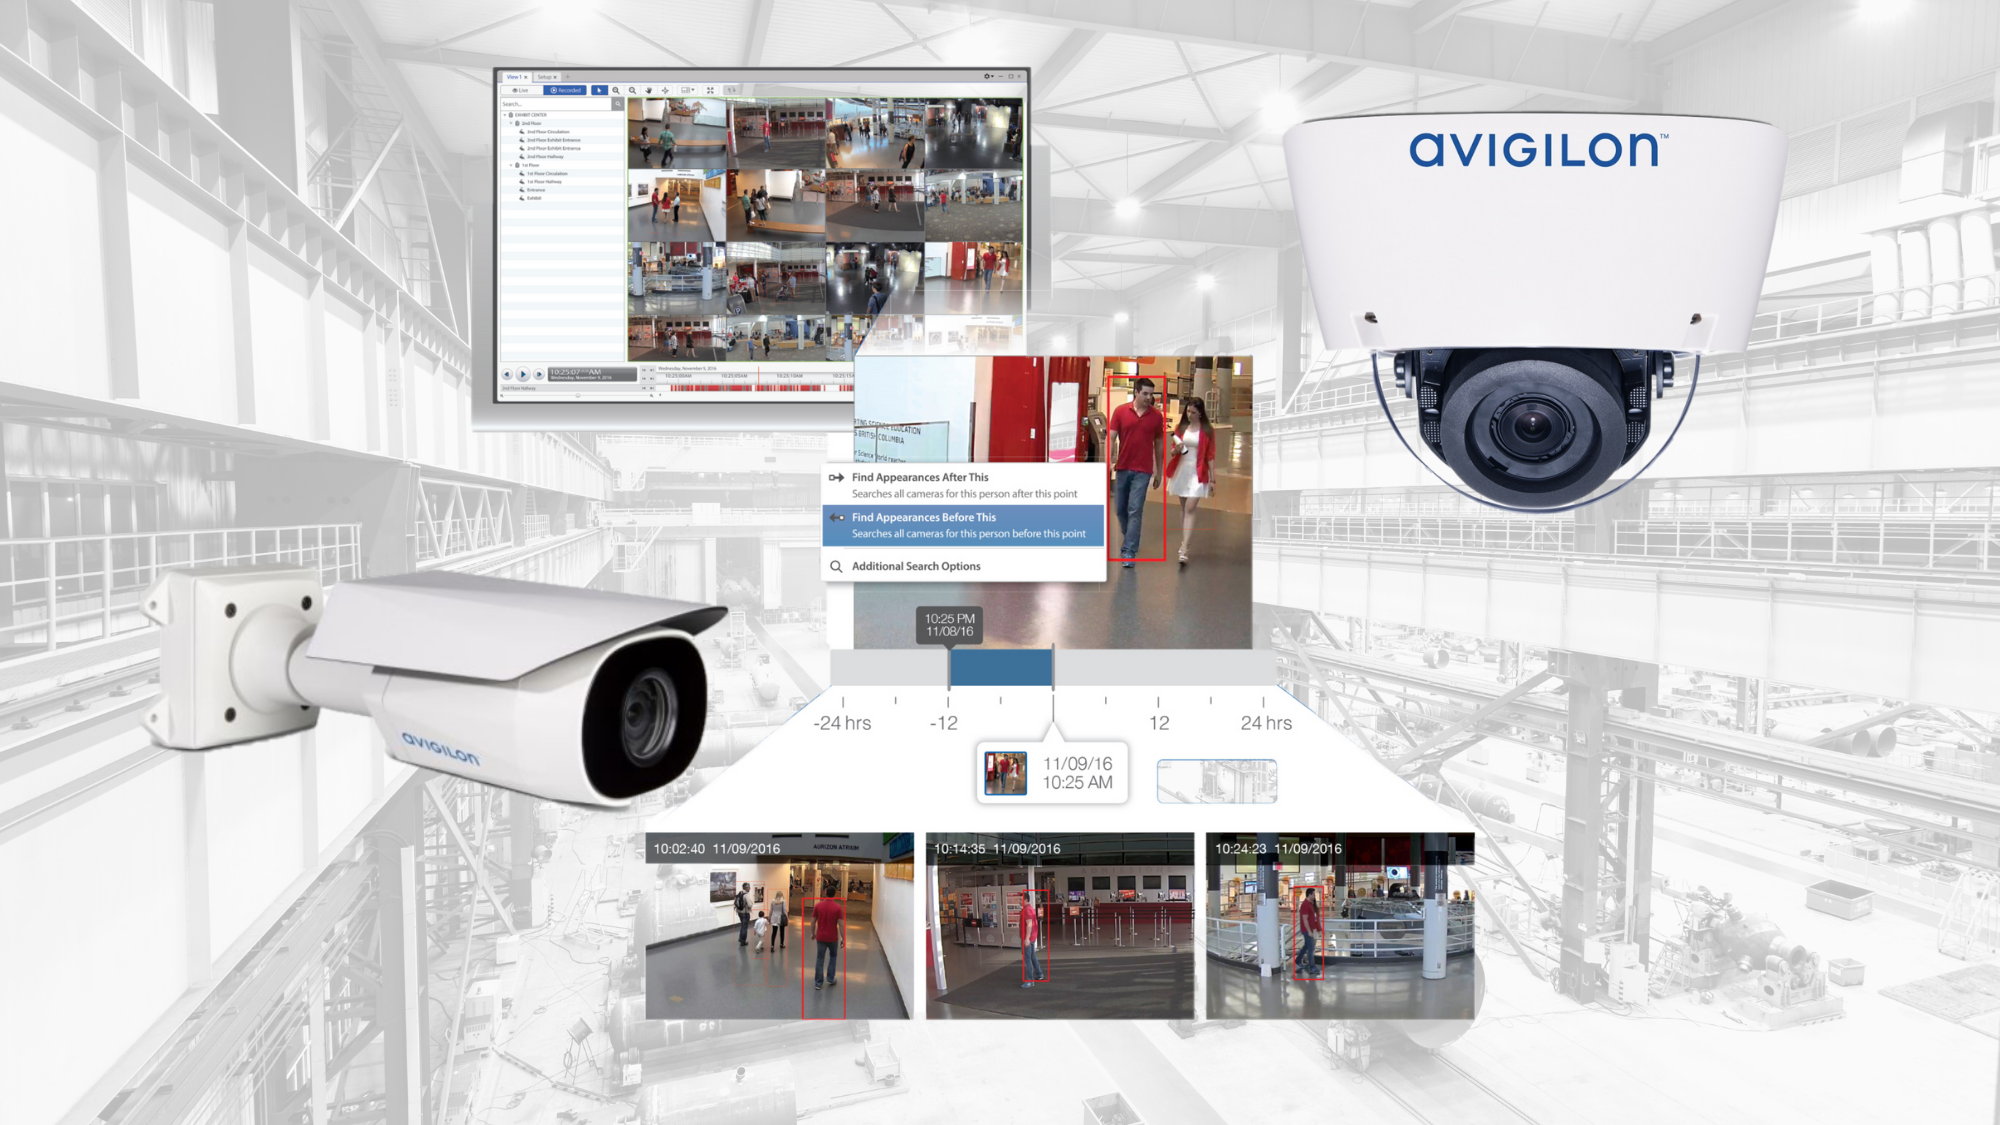 Avigilon: Offering end-to-end video security - Security Group, Bristol